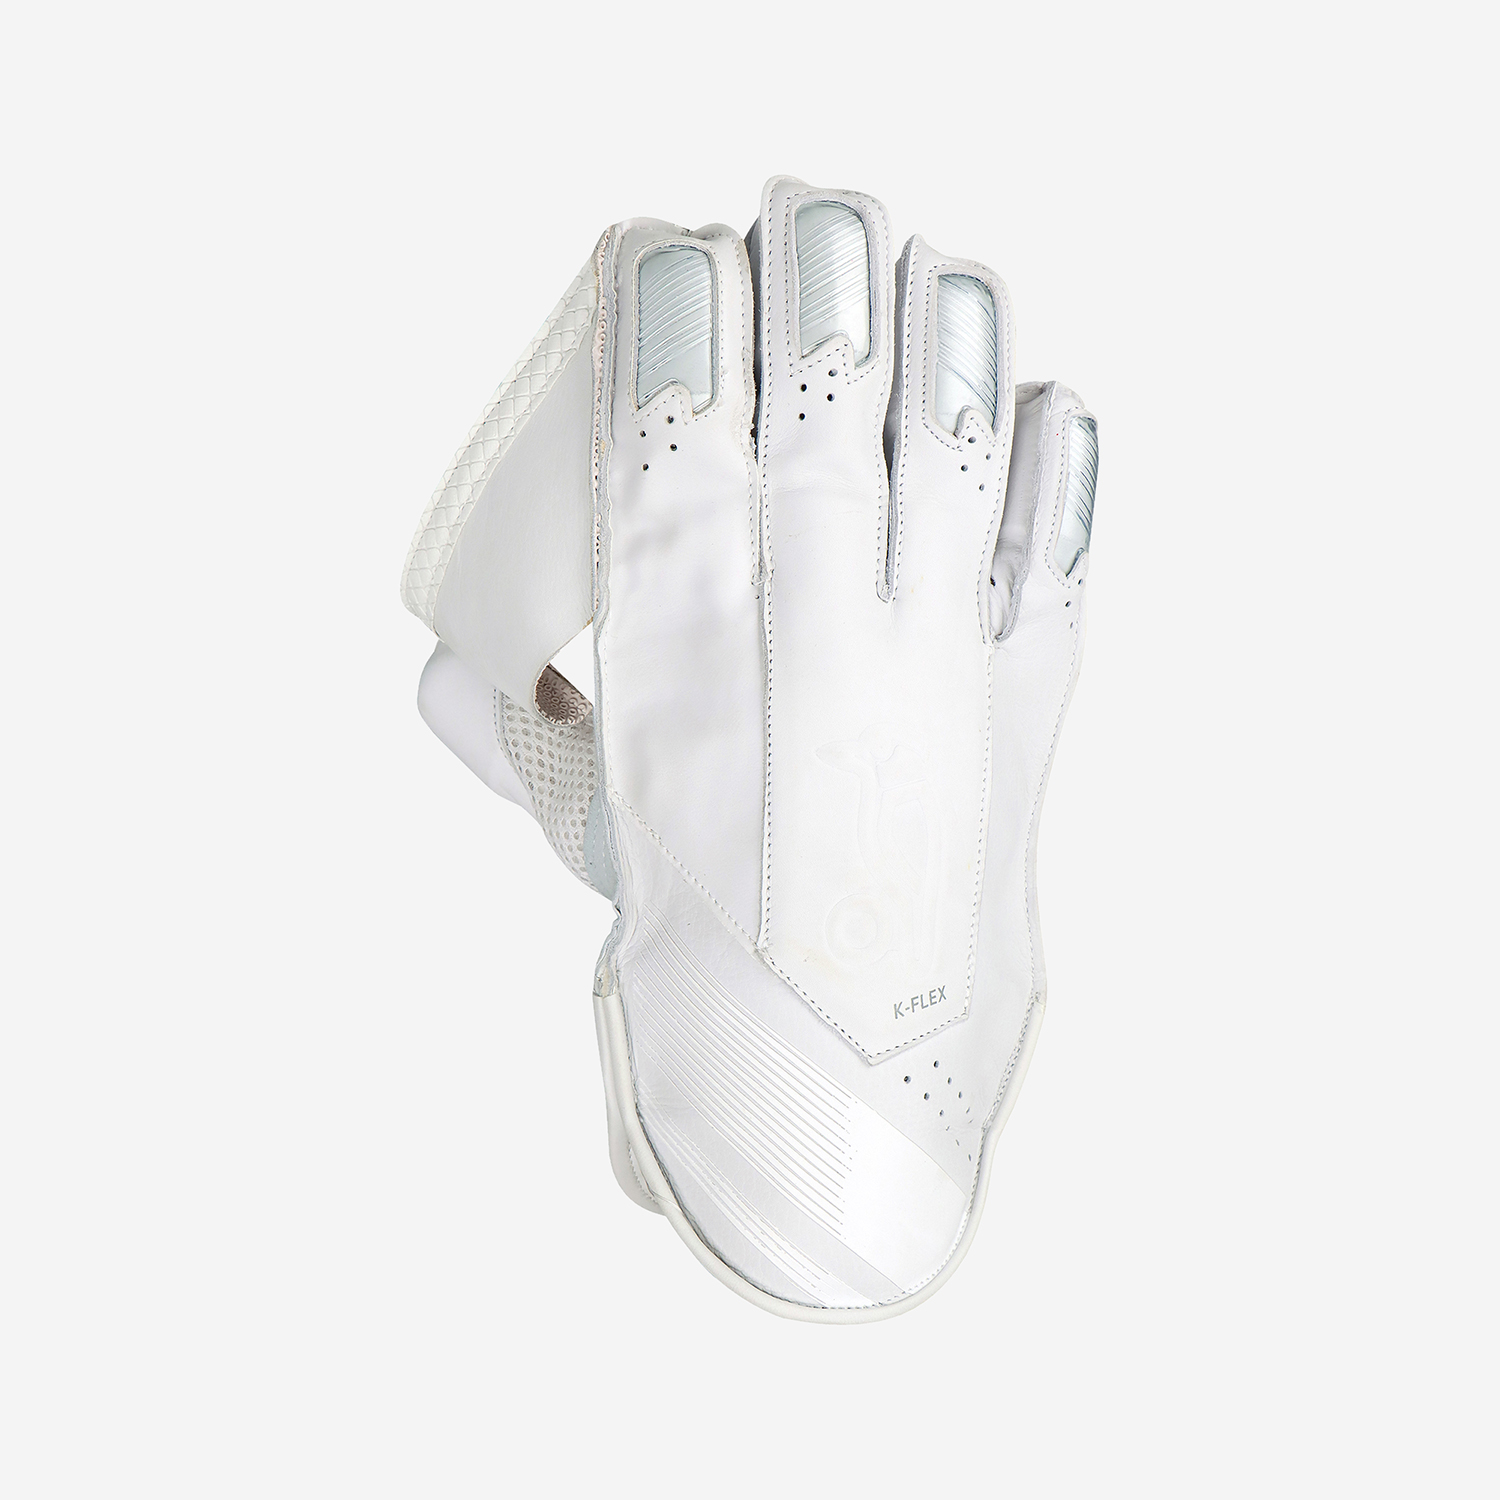 Players Replica JNR Wicket Keeping Gloves